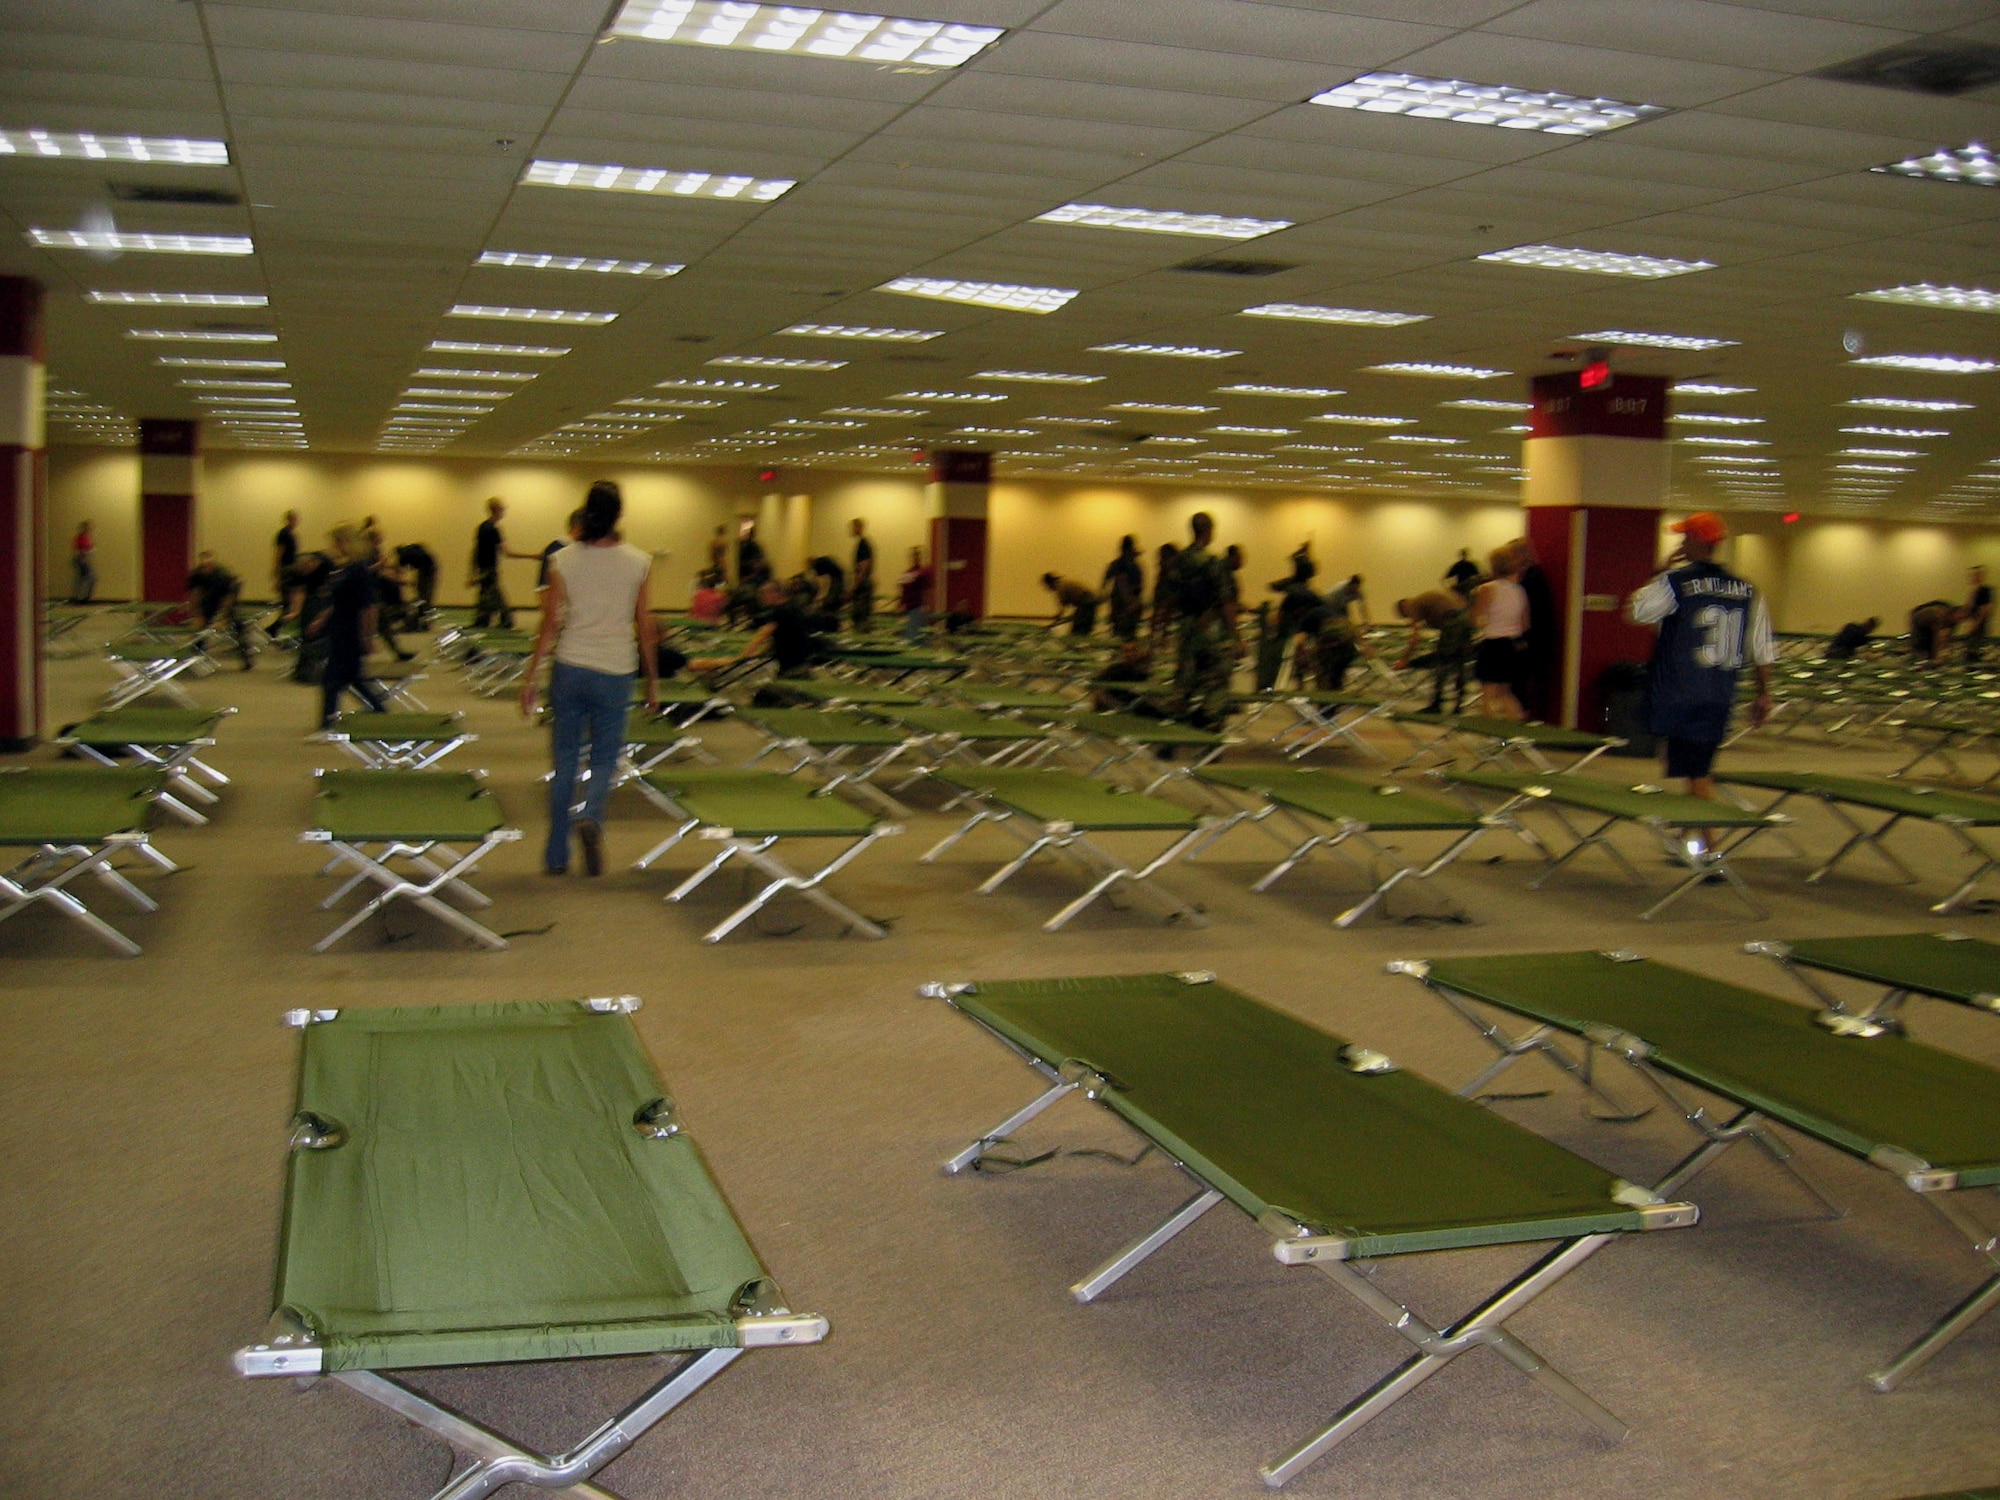 SAN ANTONIO -- Two hundred Airmen from nearby Lackland Air Force Base helped other volunteers set up about 2,500 cots and tear down modular office furniture in a 350,000 square foot building. The building will be used for people displaced by Hurricane Katrina.  (U.S. Air Force photo by Tech. Sgt. J.C. Woodring)